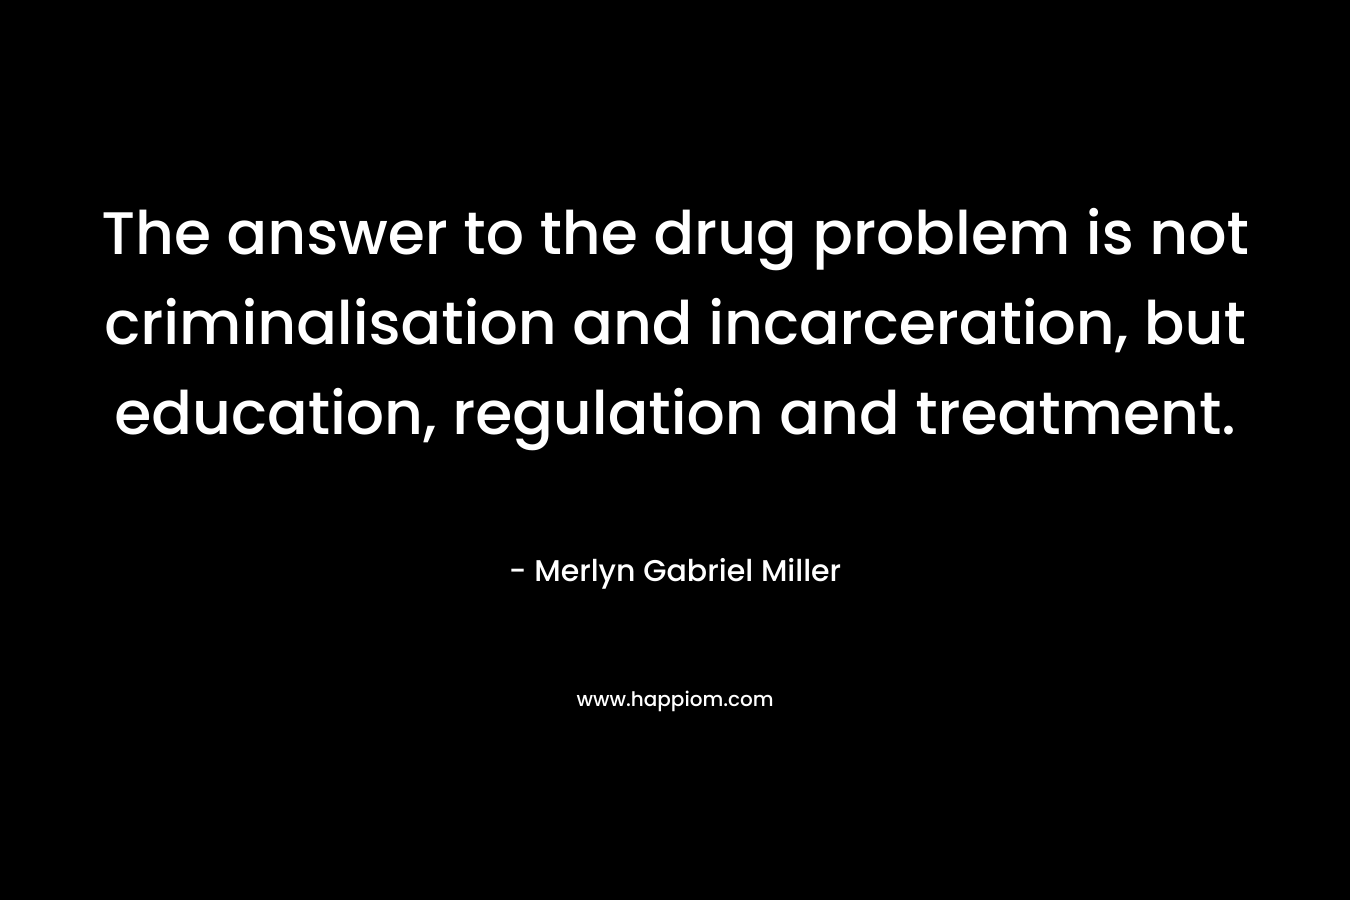 The answer to the drug problem is not criminalisation and incarceration, but education, regulation and treatment.